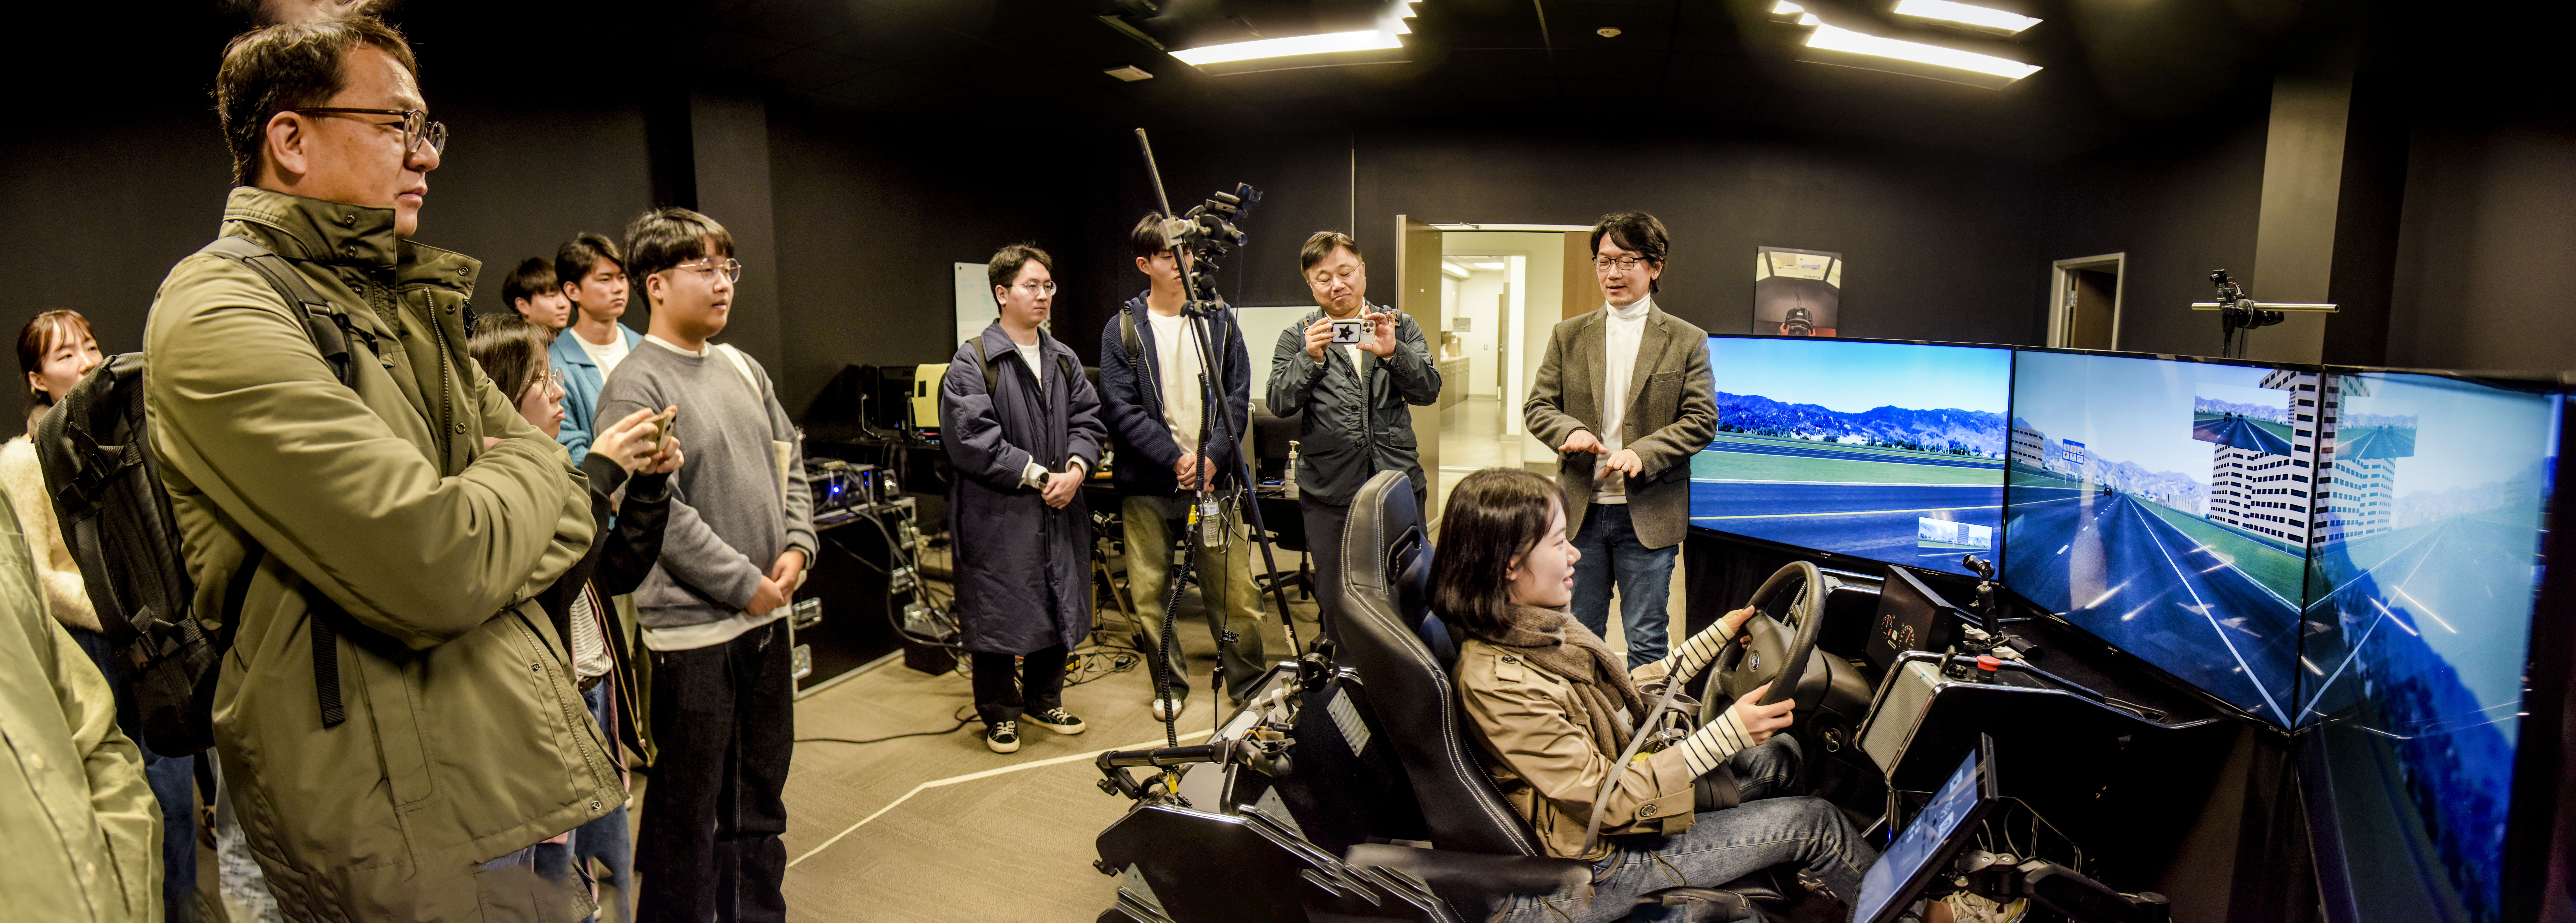 Members from the KAIST Program gather around the driving simulator at the Texas A&M Transportation Institute headquarters.